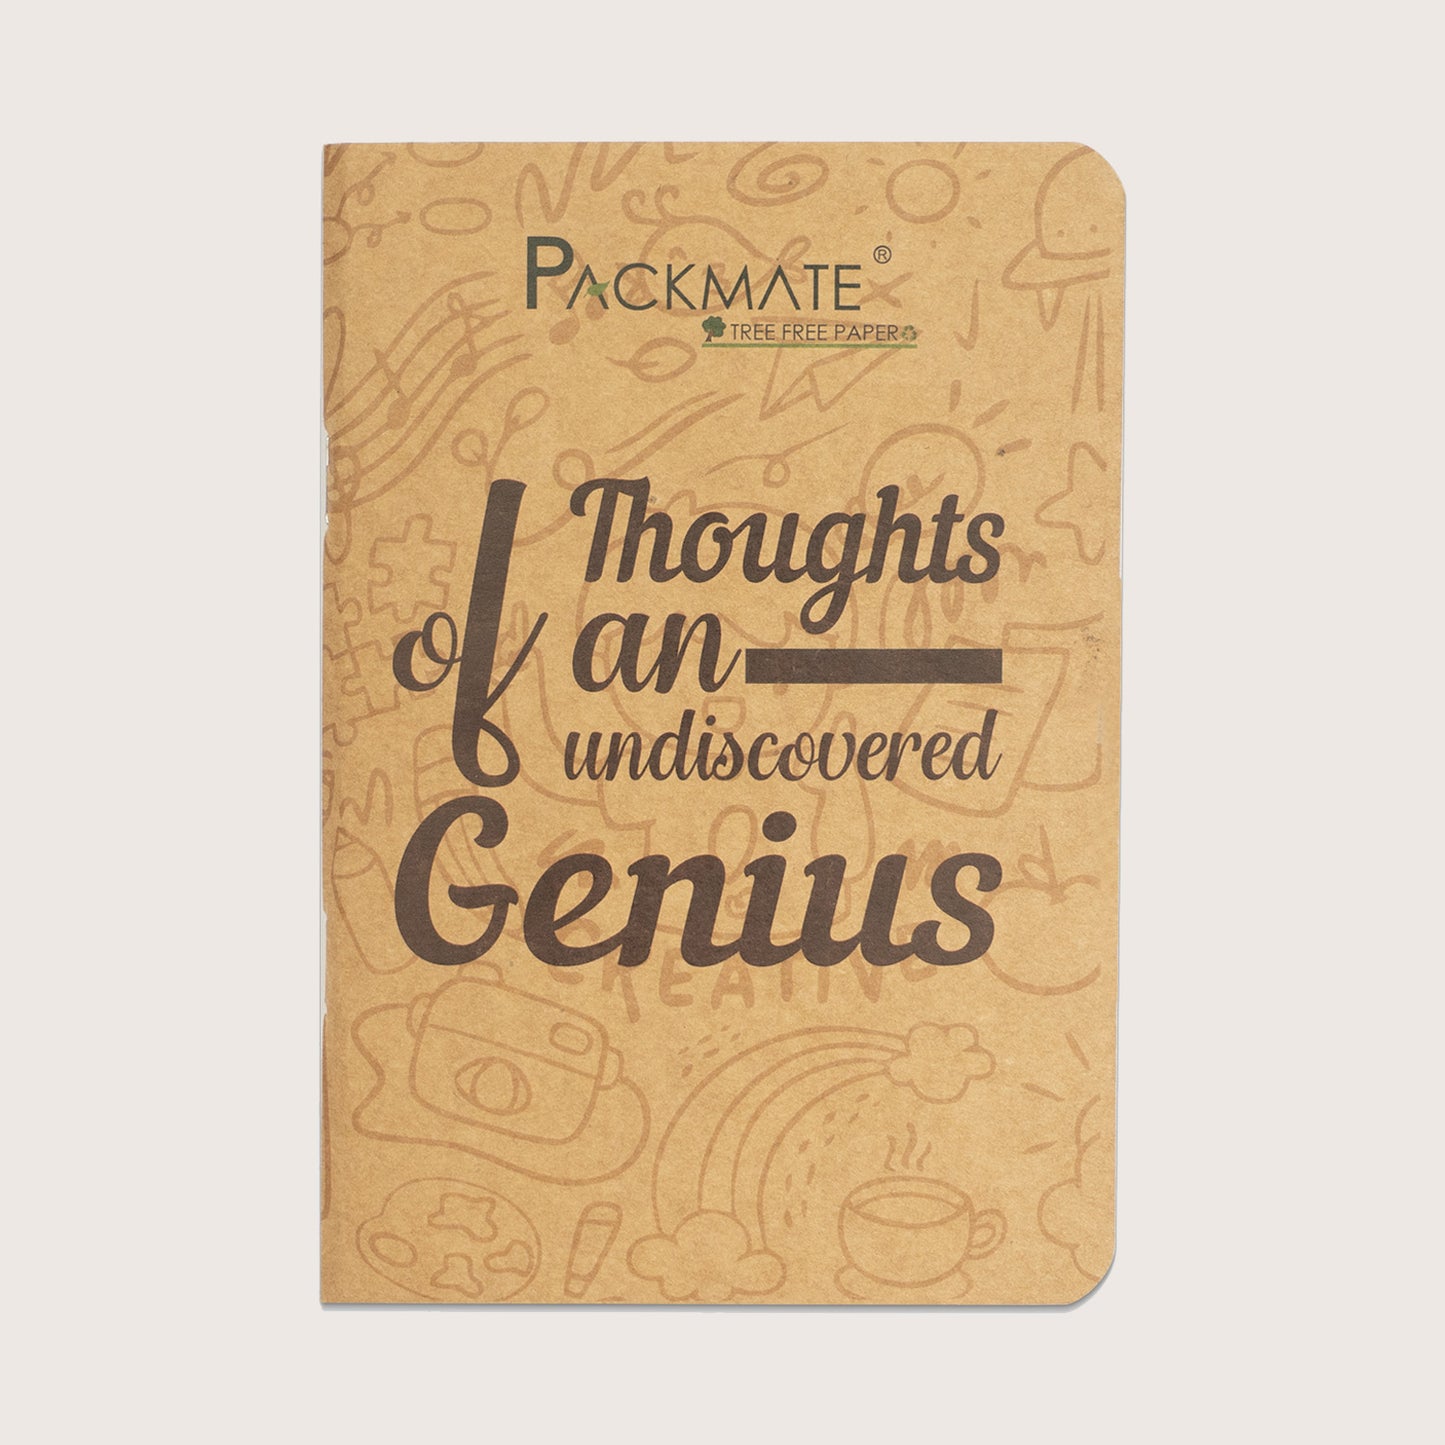 Packmate Notepad (Pack of 5)  Made From 100% Recycled Paper